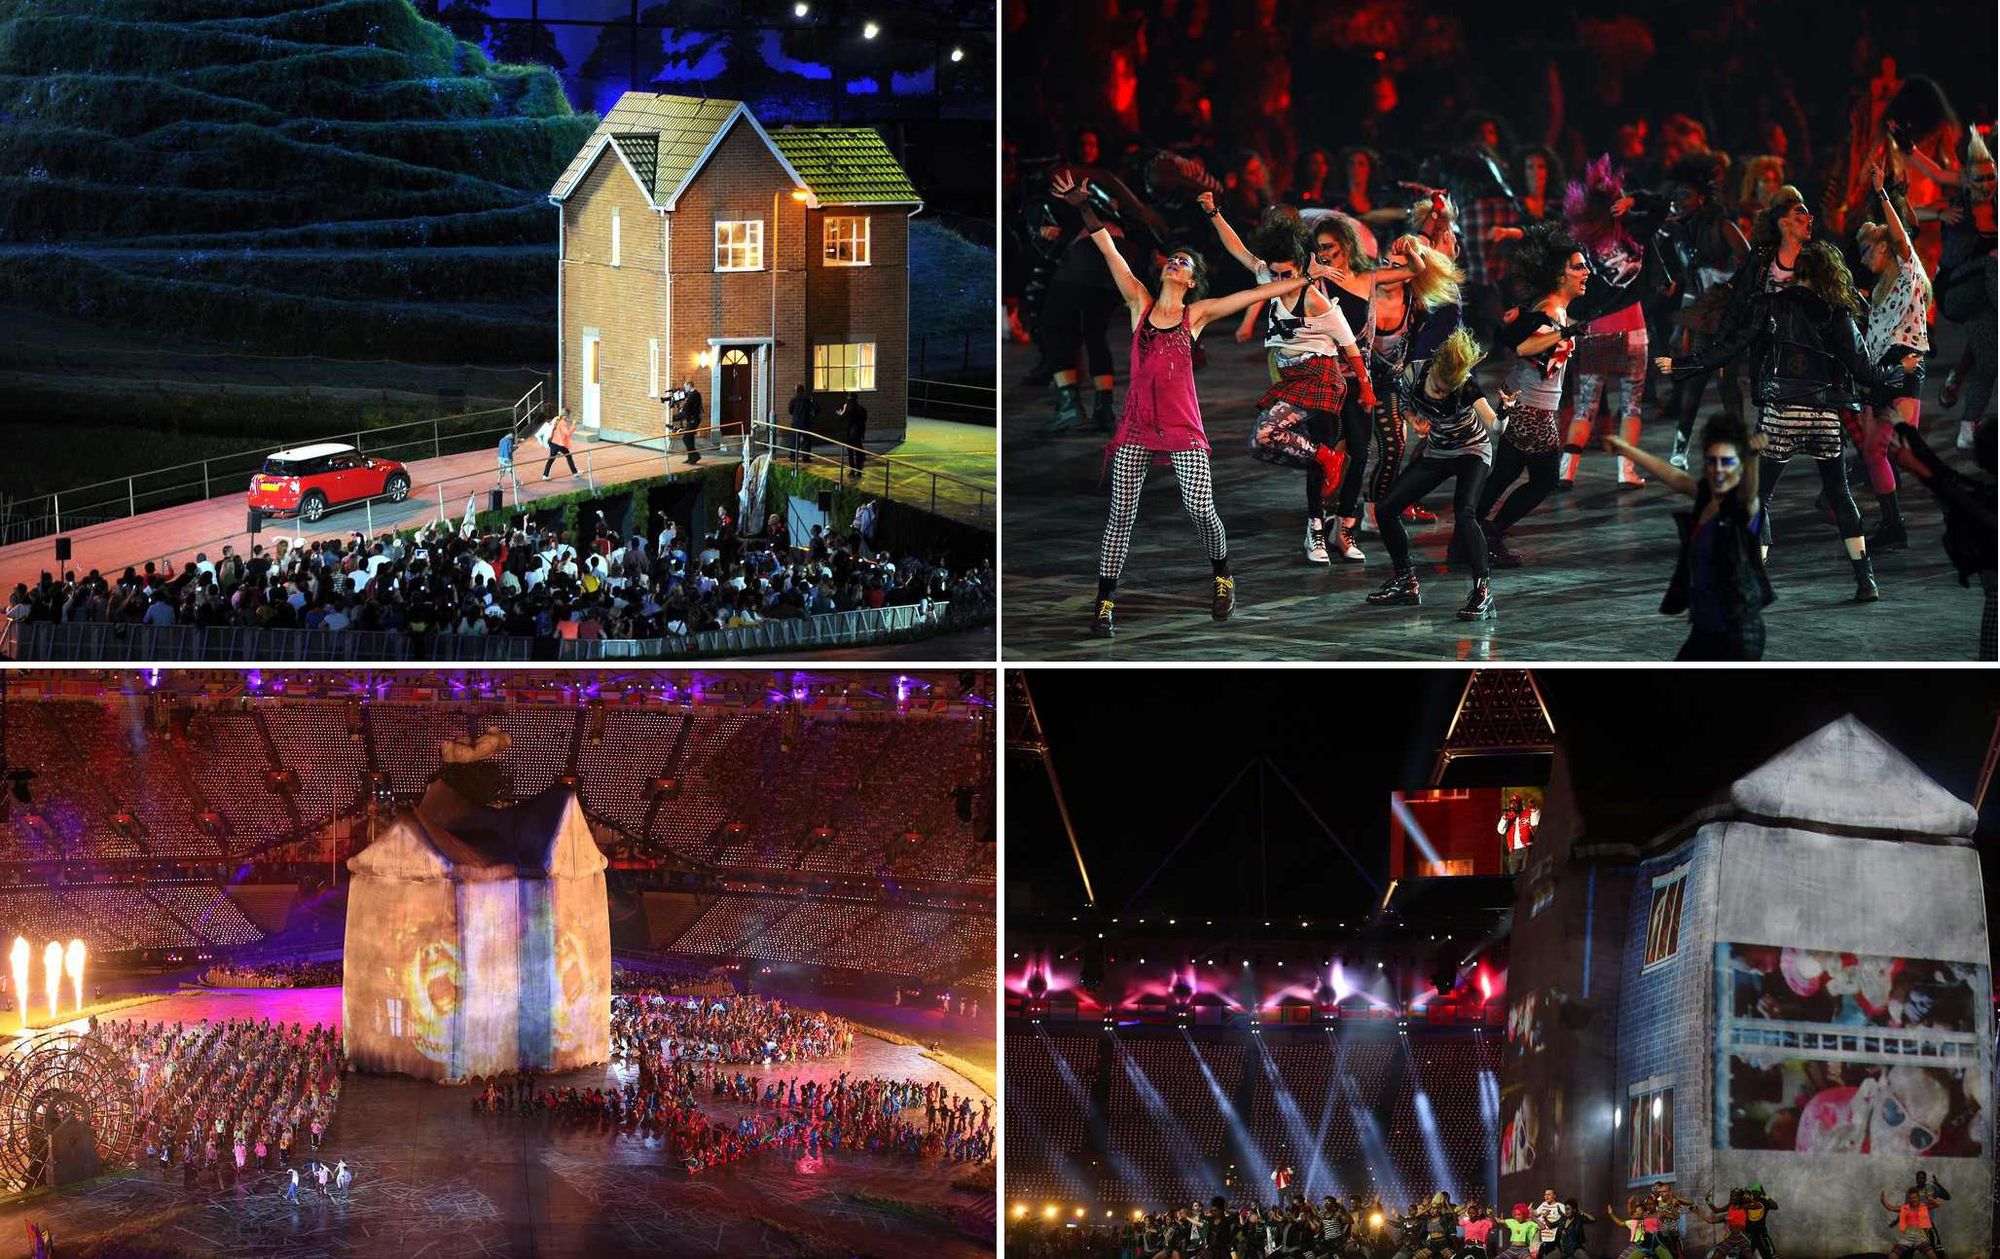 The segment on youth culture at the London 2012 Olympics Opening Ceremony